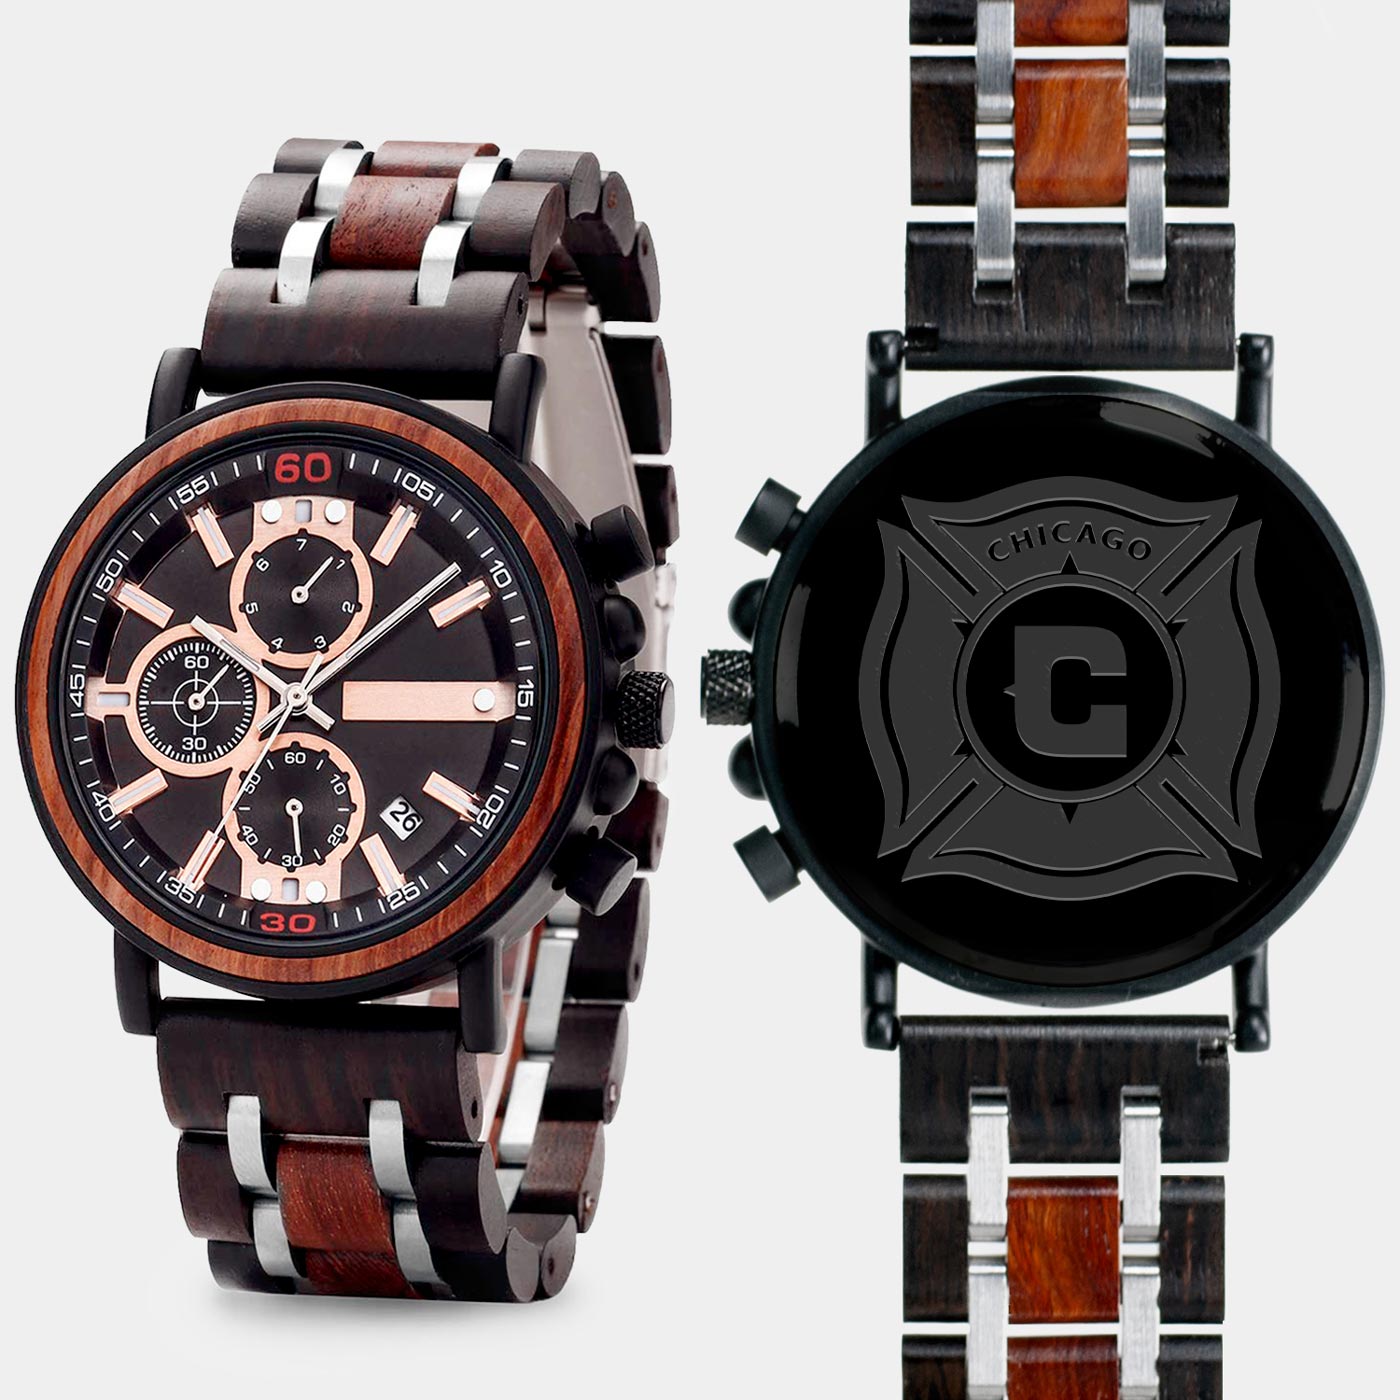 Chicago Fire SC Mens Wrist Watch  - Personalized Chicago Fire SC Mens Watches - Custom Gifts For Him, Birthday Gifts, Gift For Dad - Best 2022 Chicago Fire SC Christmas Gifts - Black 45mm MLS Wood Watch